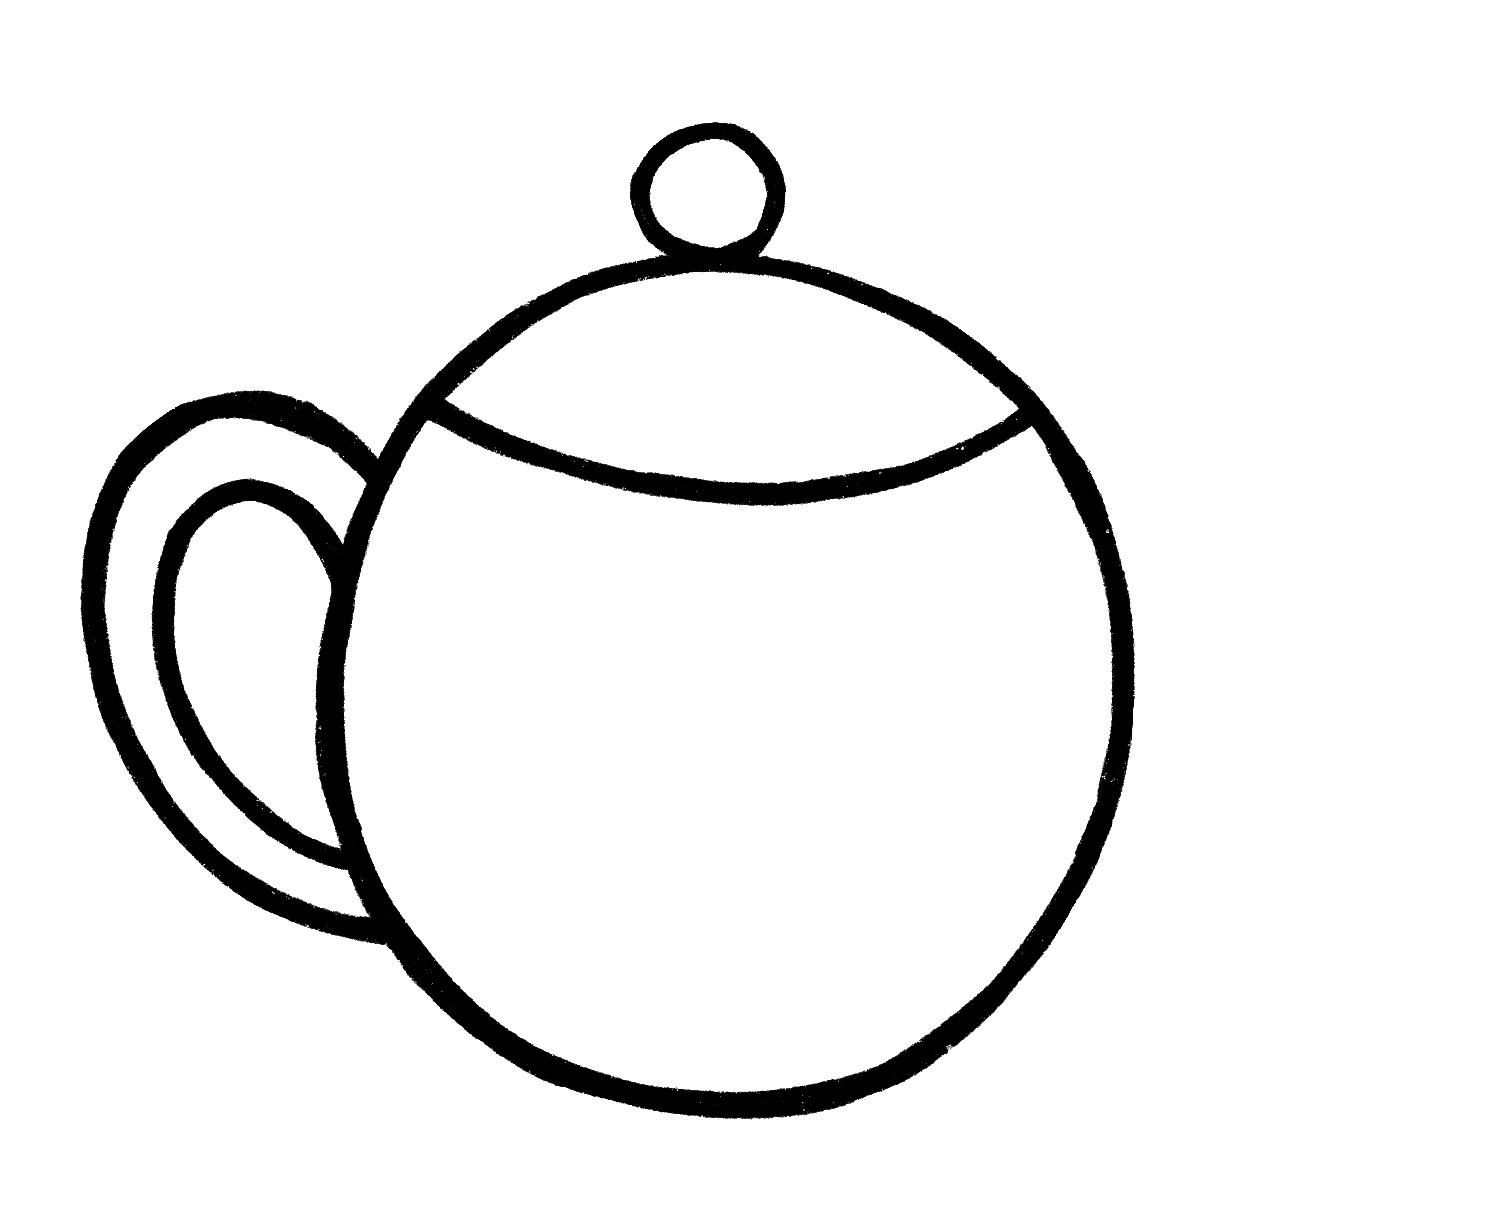 Details more than 134 kettle drawing easy latest